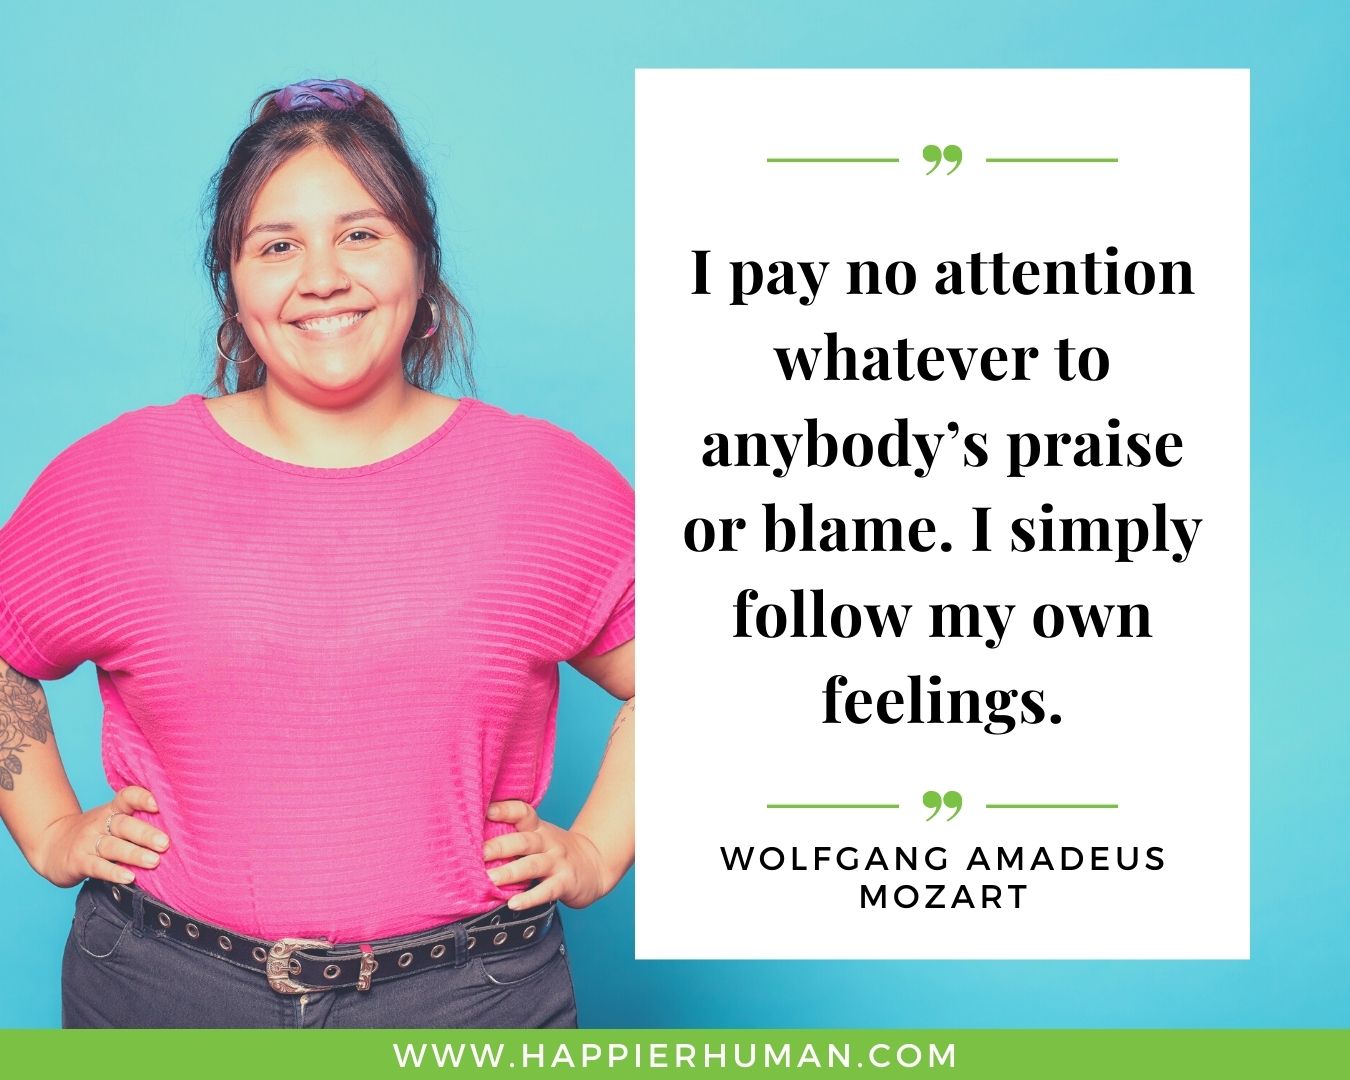 Haters Quotes - “I pay no attention whatever to anybody’s praise or blame. I simply follow my own feelings.“- Wolfgang Amadeus Mozart